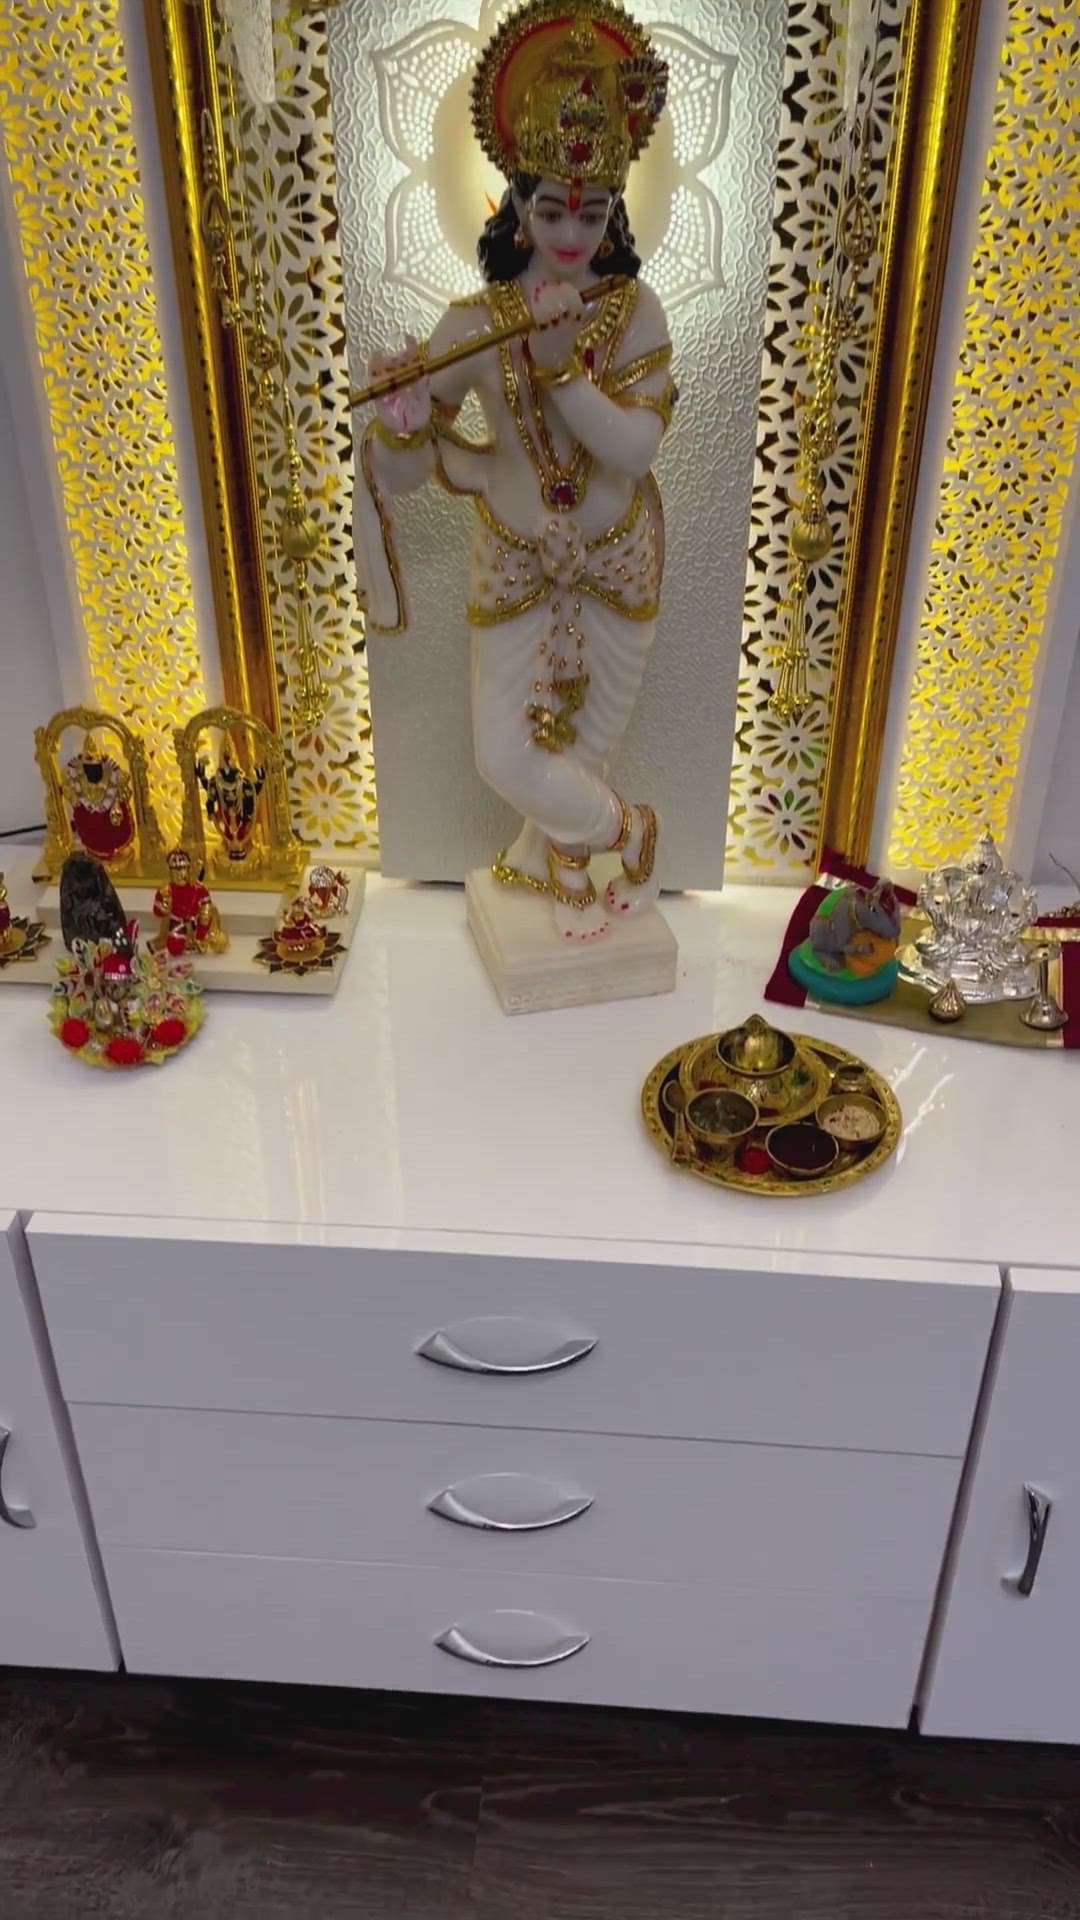 Prayer Room (Indian Mandir) Pooja Ghar
-Comment Down Which One Is your Favourite.
-Like, Share With Your Friends.
-We Provide Pan India Services
-Dm For Reasonable Rates.
-For Construction And Home Designs.
-We Do Vastu Work Also.
.
.
#Prayerrooms #mandir #Designs #templedesign #HomeDecor